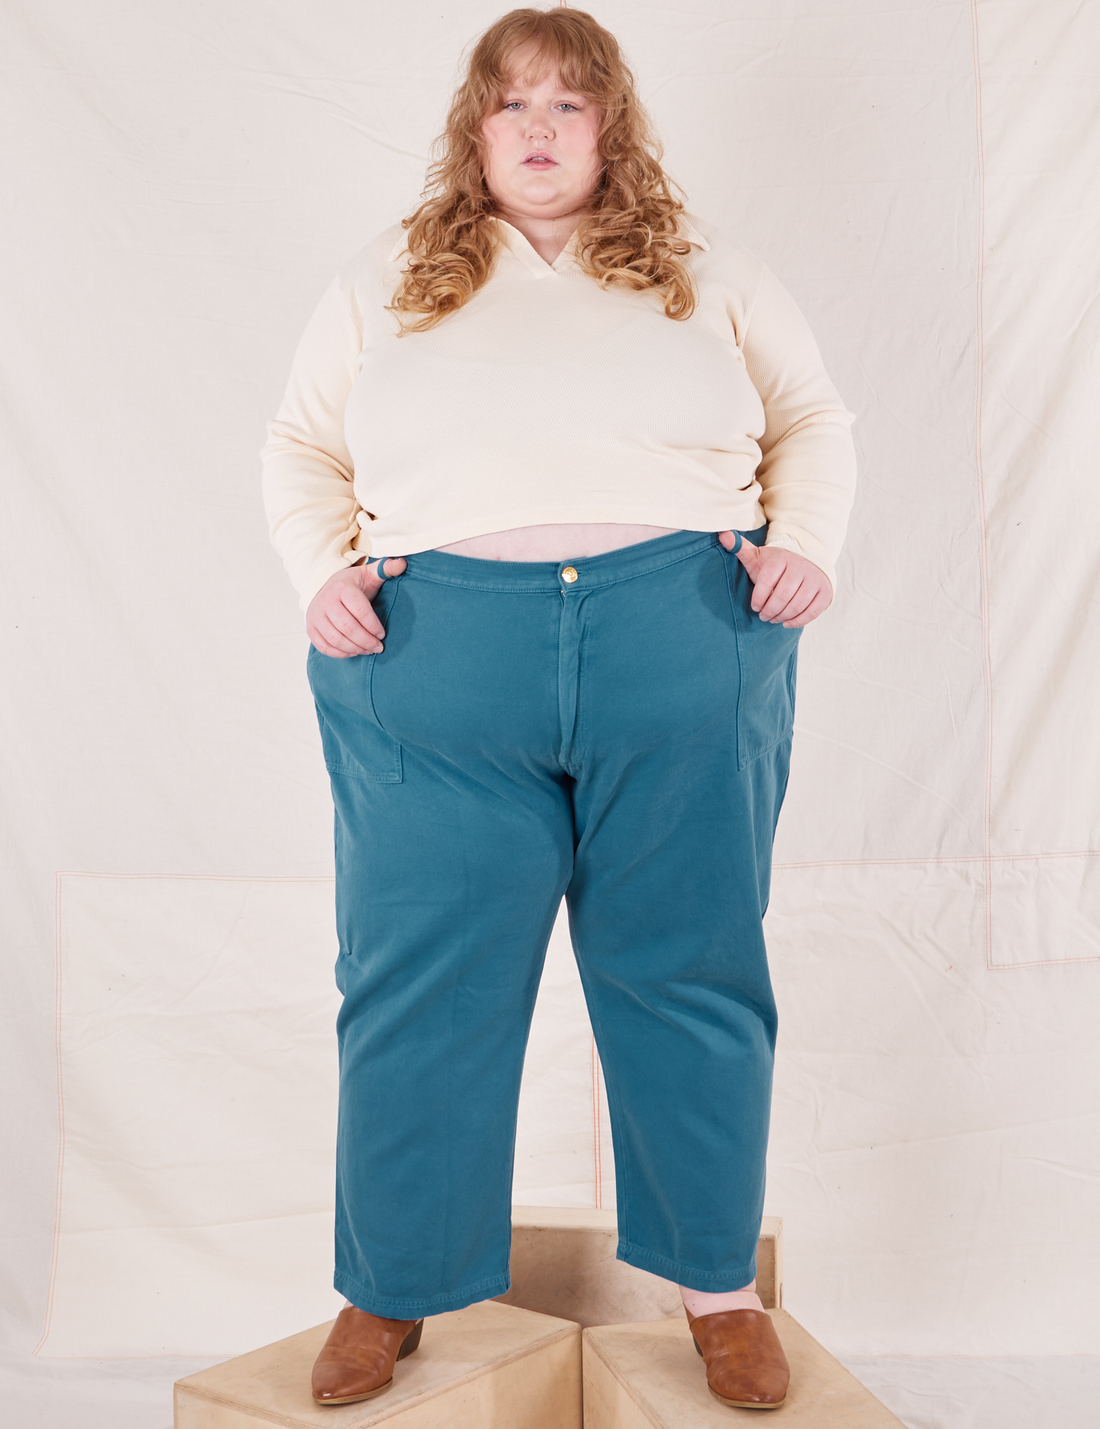 Catie is 5'11" and wearing 5XL Organic Work Pants in Marine Blue paired with vintage off-white Long Sleeve Fisherman Polo